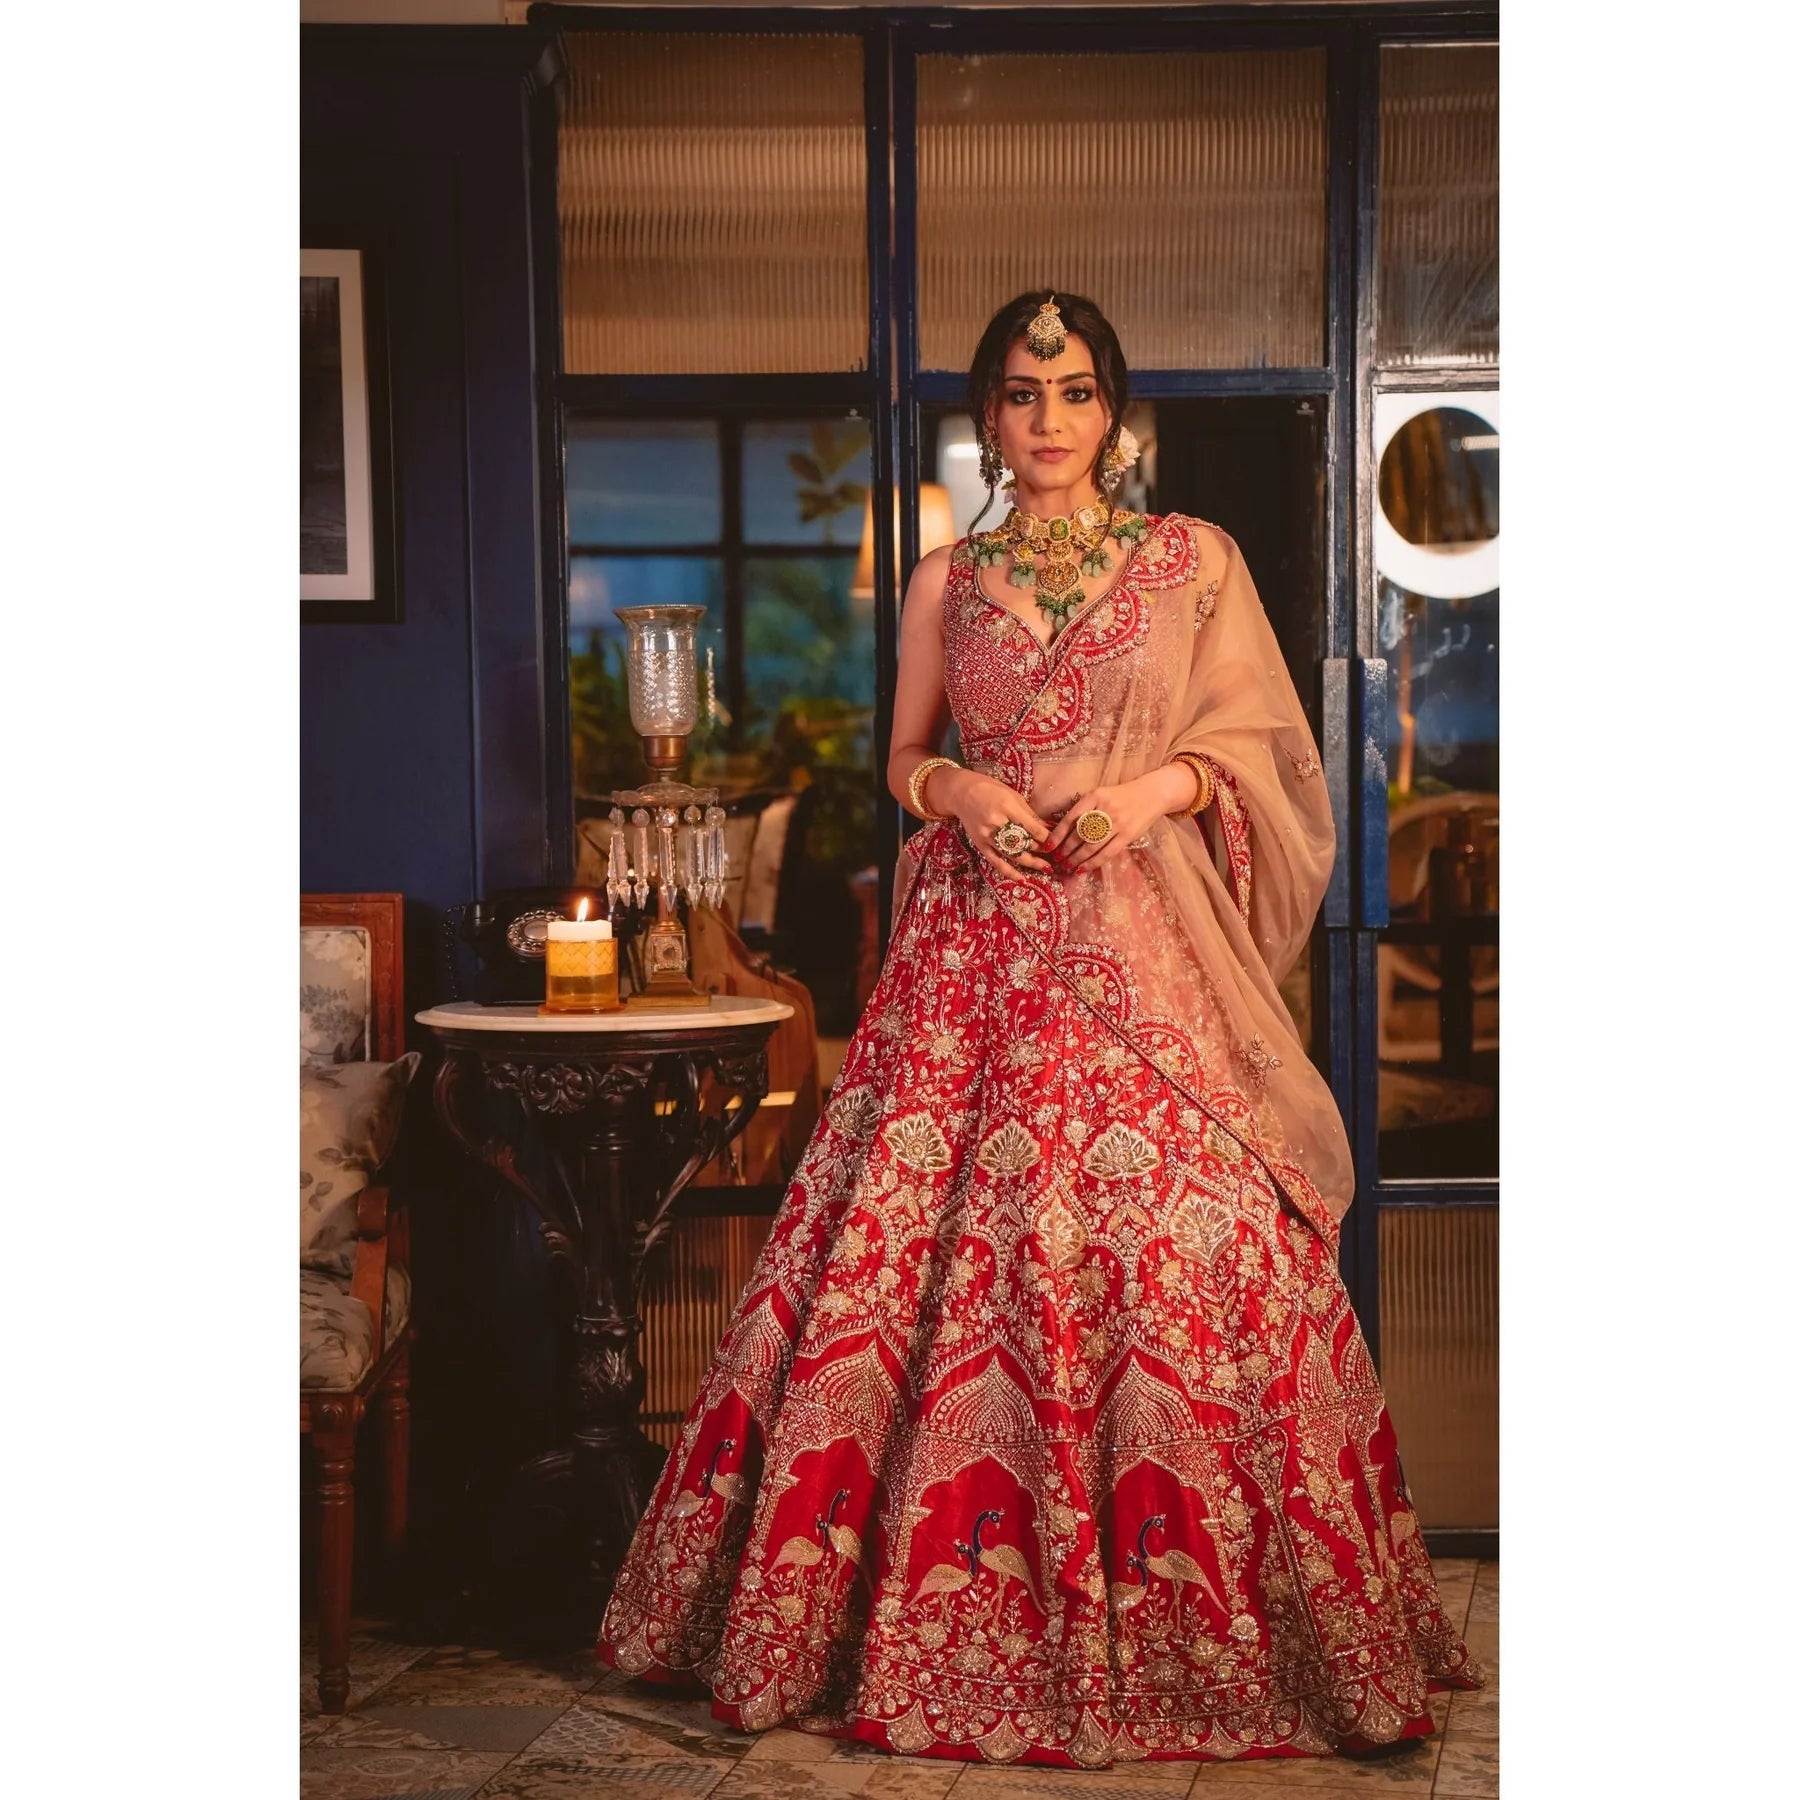 Embracing Tradition: The Timeless Elegance of the Red Bridal Lehenga